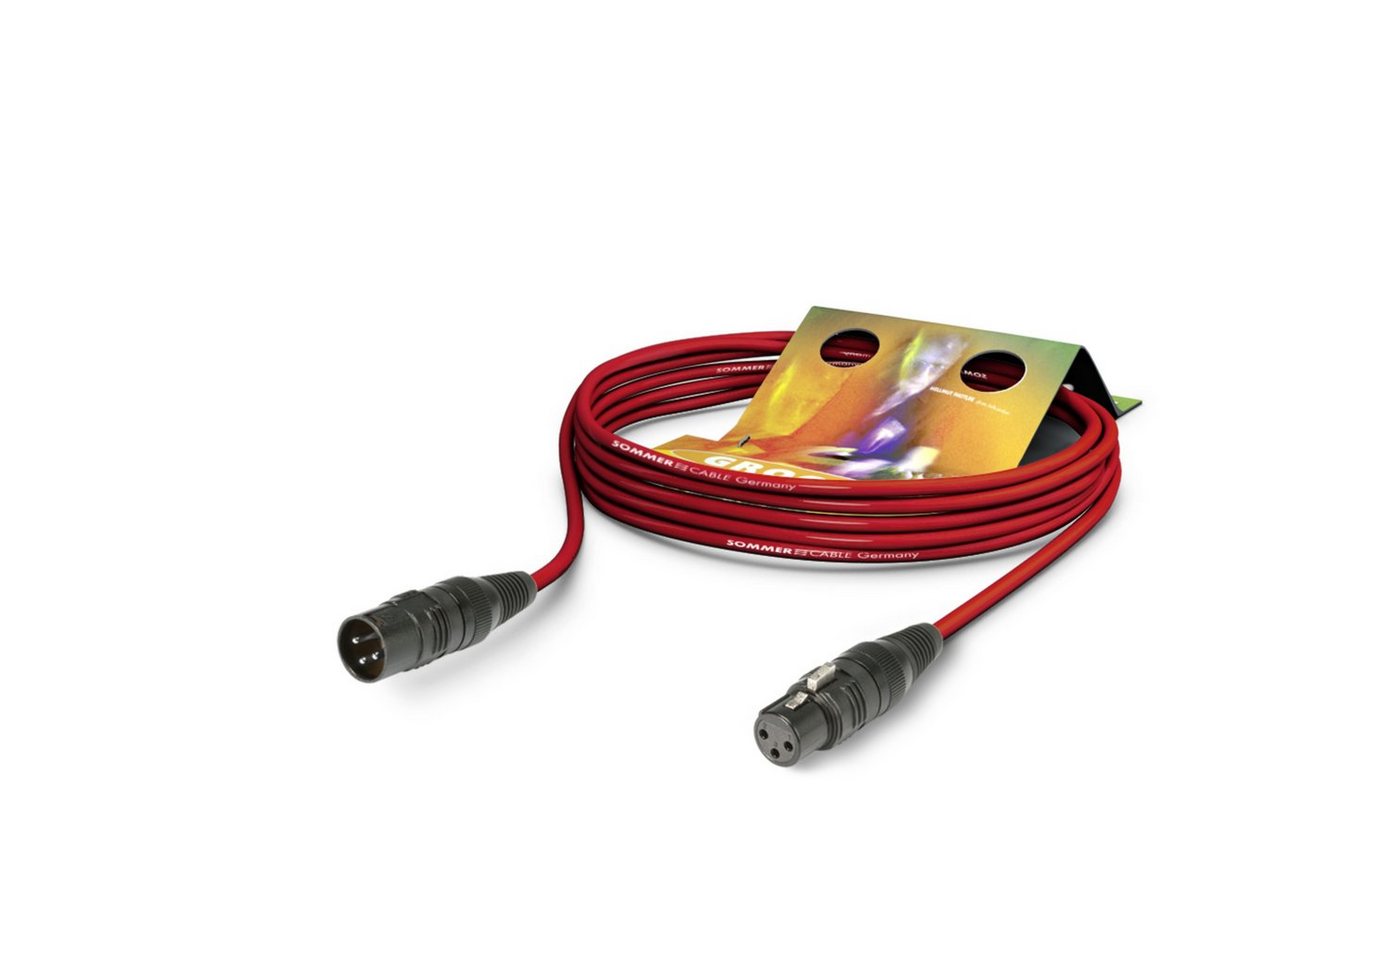 Sommer Cable Audio-Kabel, SGCE-0600 RT Mikrofonkabel 6 m - Mikrofonkabel von Sommer Cable